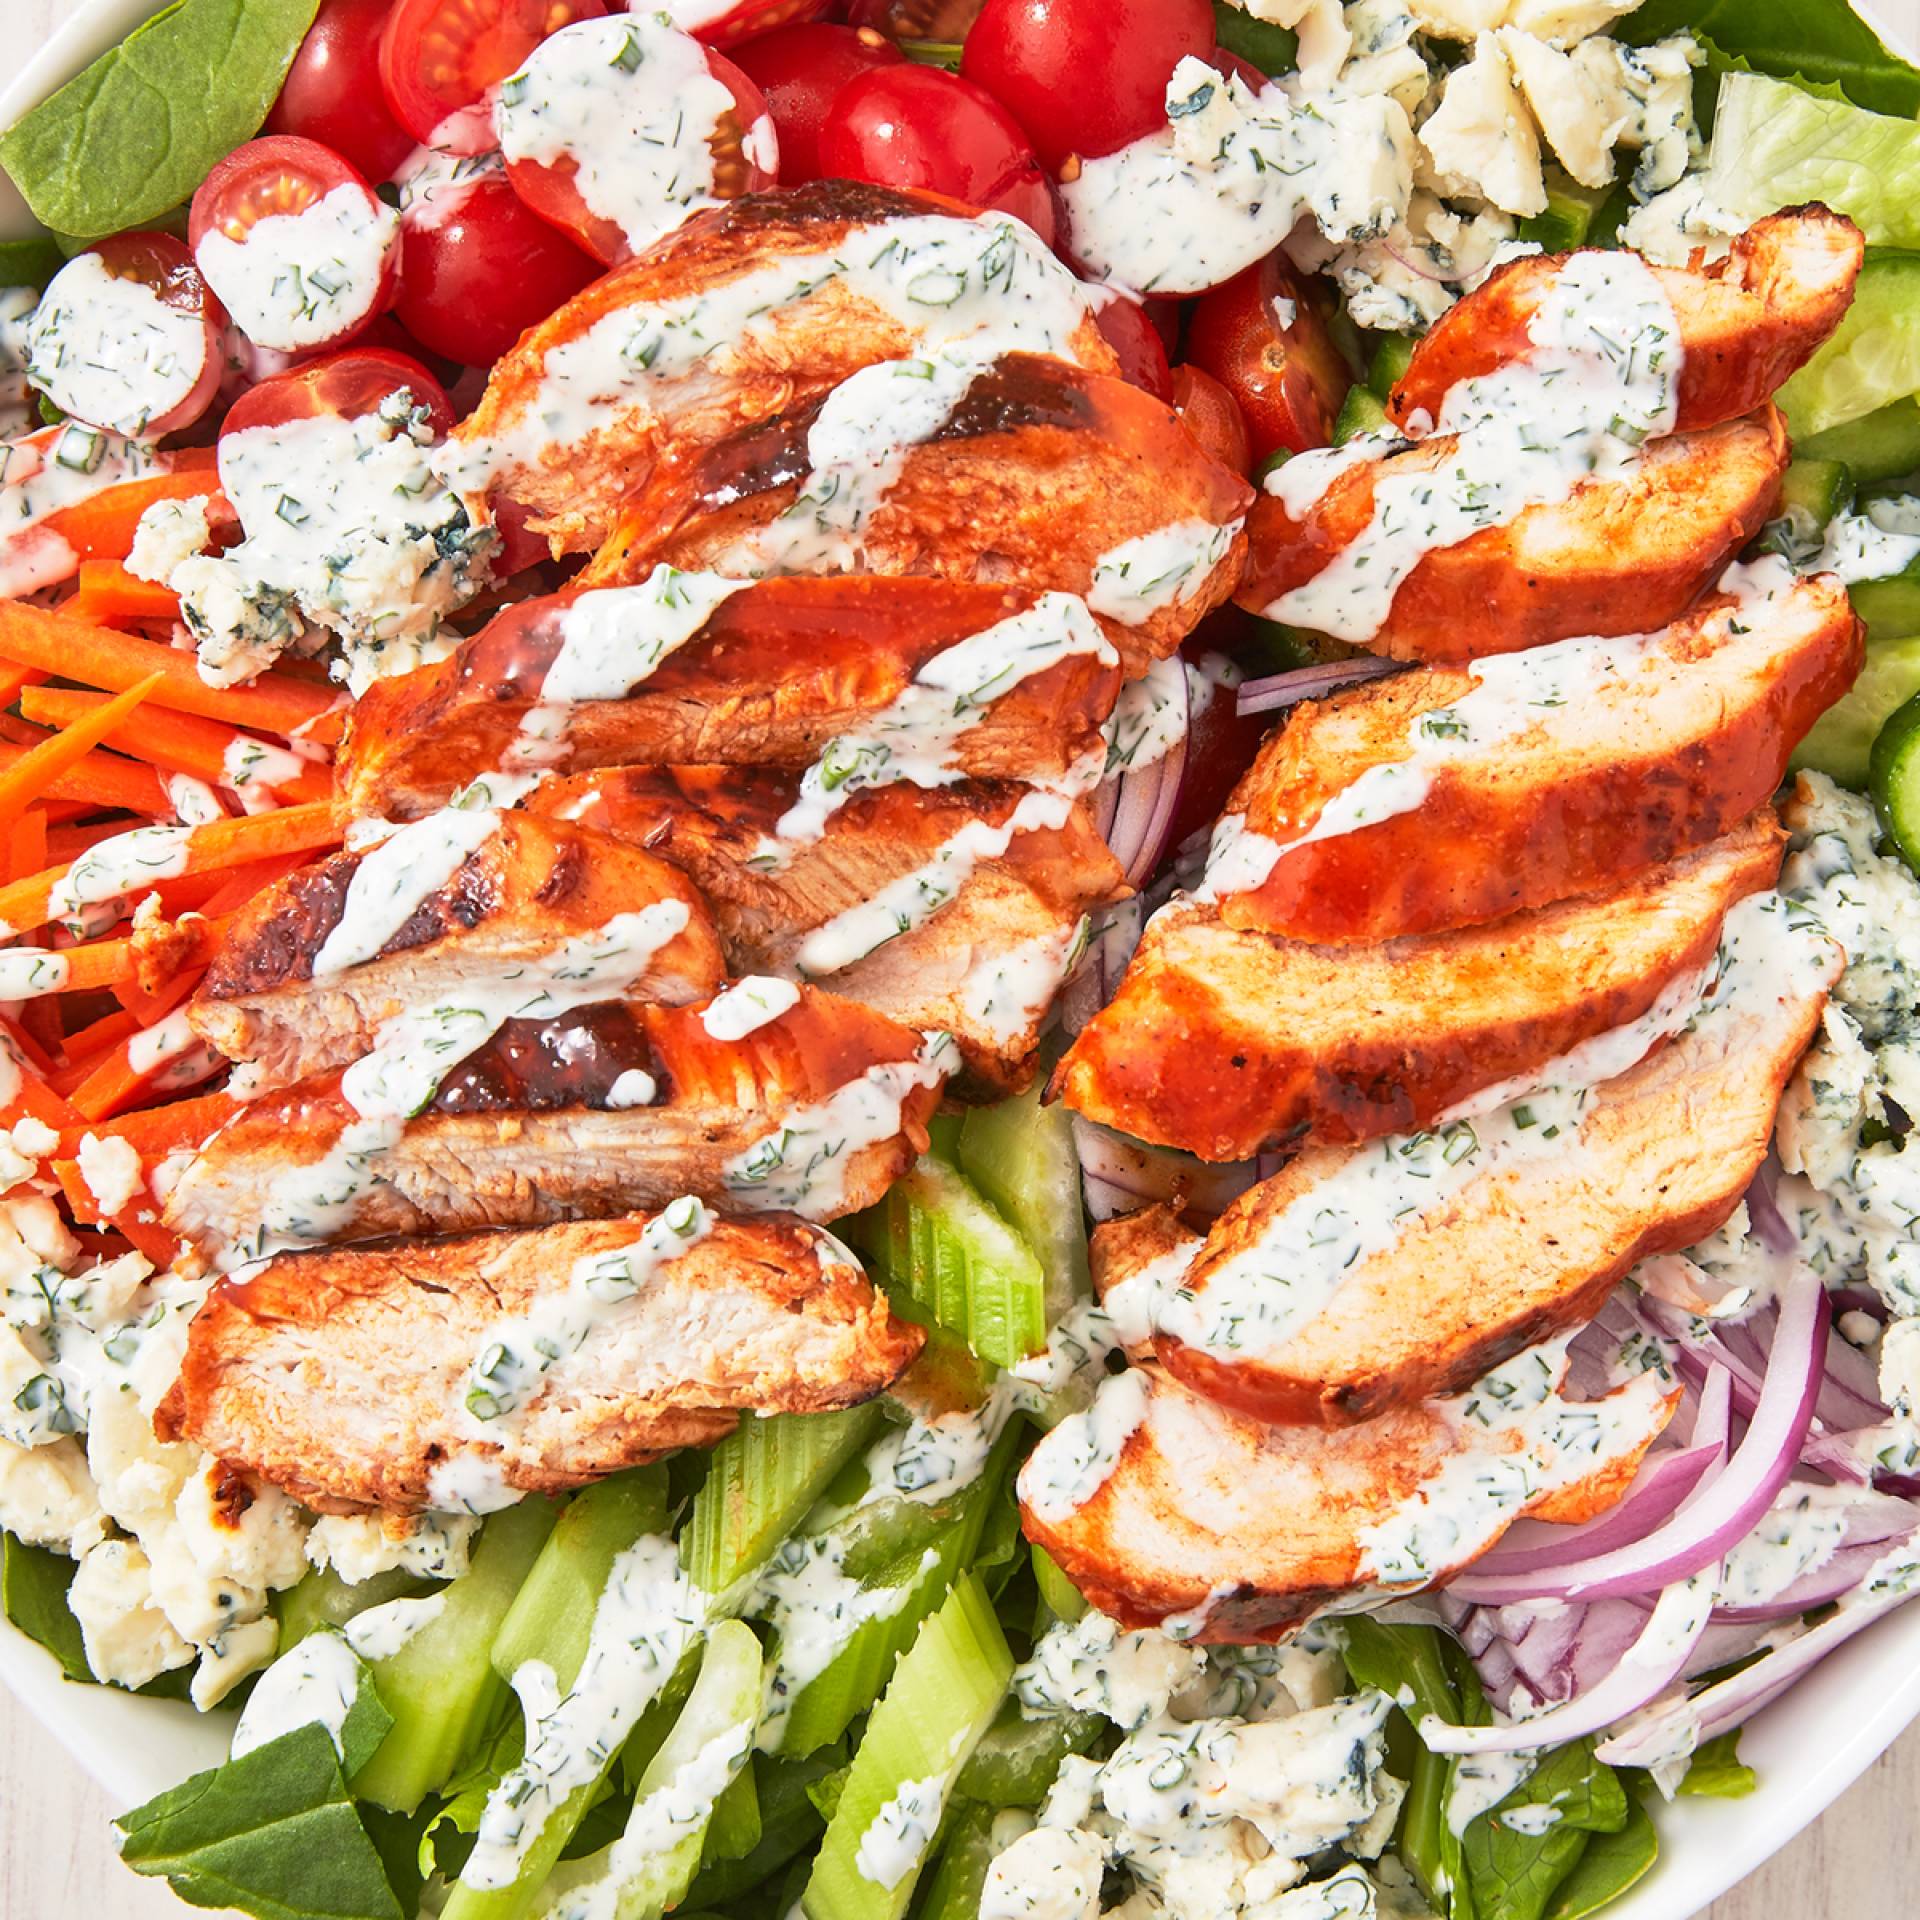 HEALTHY PORTION-Buffalo Chicken Salad w/Mixed Greens, Red Onions, Cucumber, Carrot, Tomato, Celery, Cheddar Cheese, Crountons & Ranch Vinaigrette..